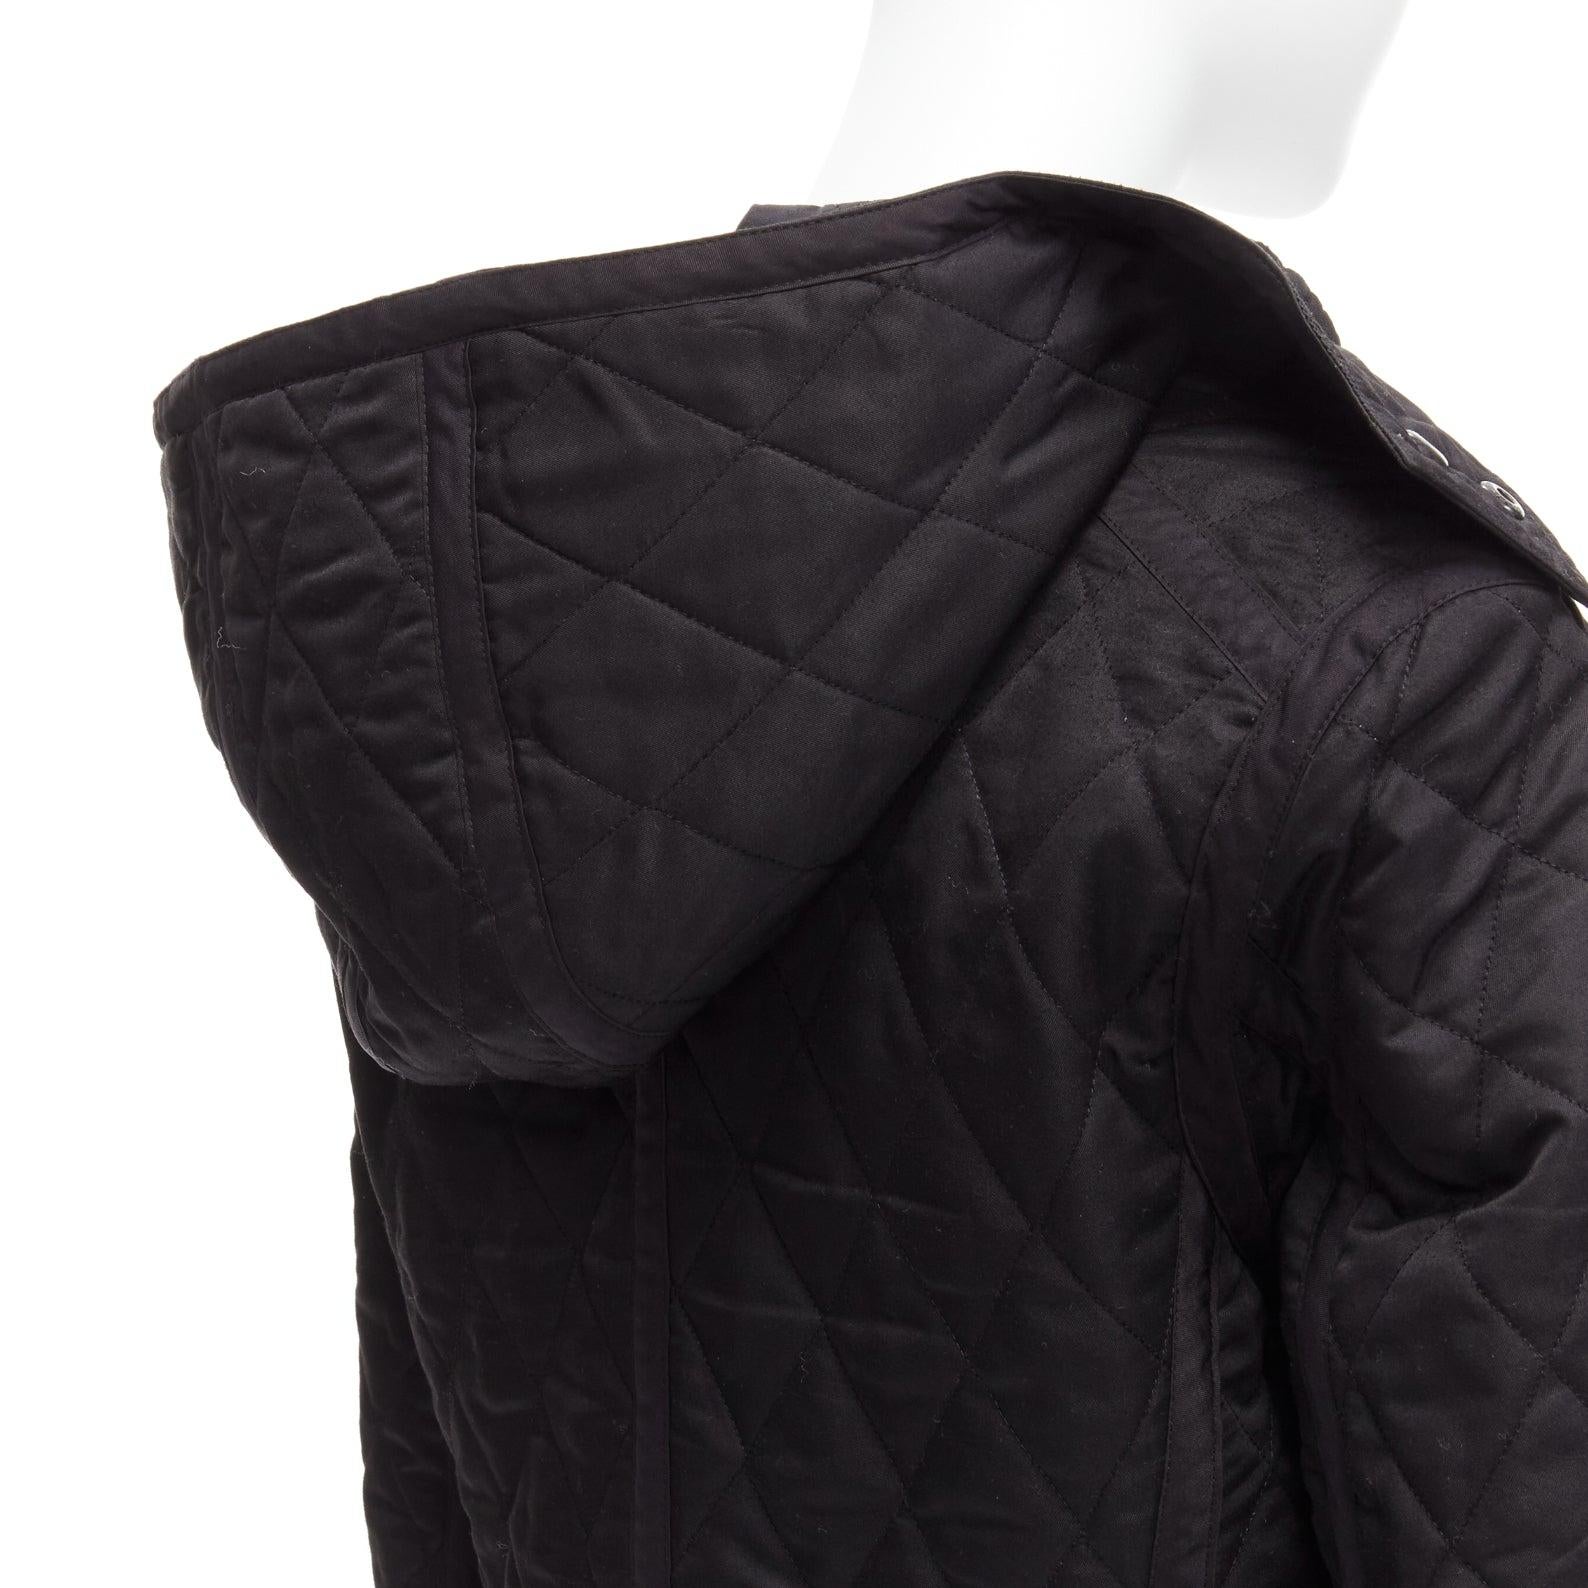 BURBERRY House Check lined black diamond quilted shell hooded jacket
Reference: CNPG/A00027
Brand: Burberry
Material: Polyester
Color: Black, Beige
Pattern: Solid
Closure: Snap Buttons
Lining: Beige Fabric
Extra Details: BURBERRY classic plaid